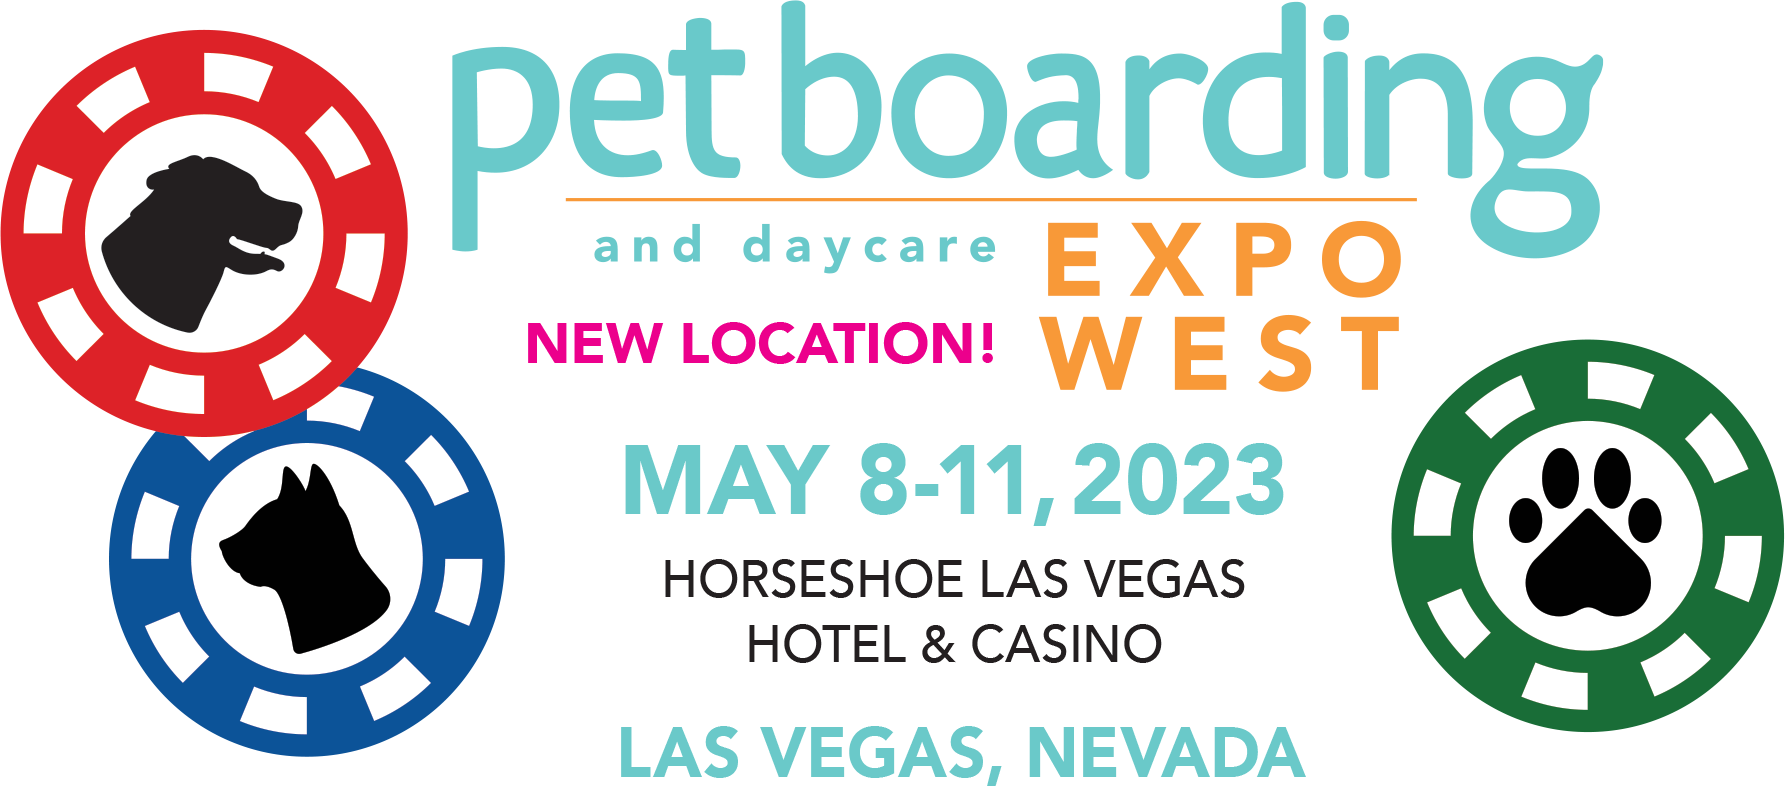 petboarding and daycare expo west new